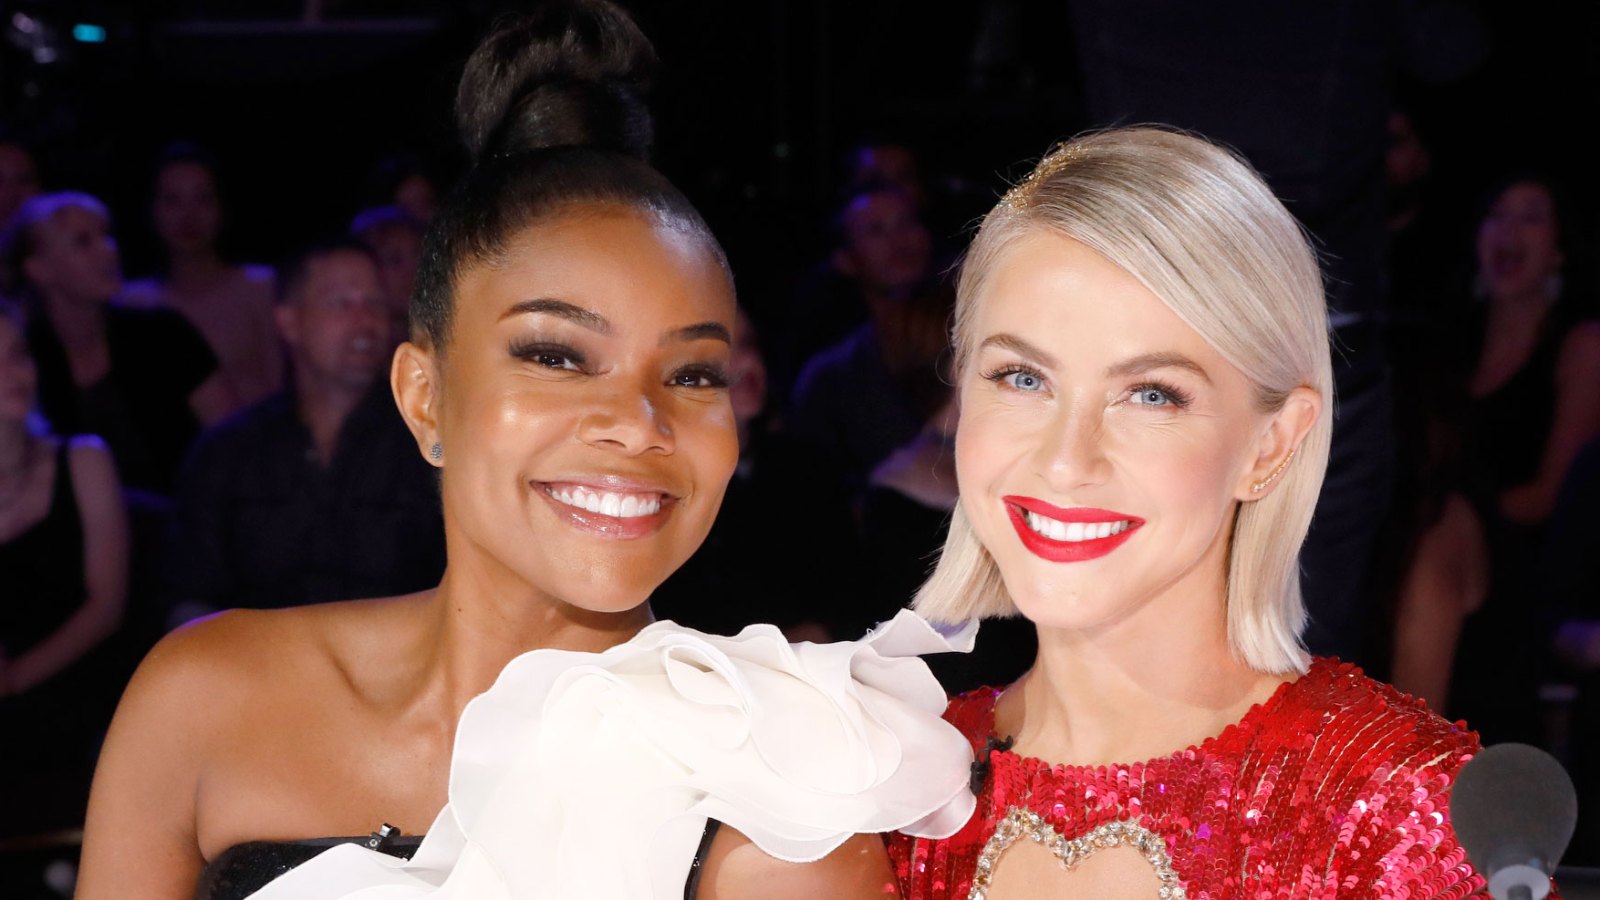 Julianne Hough and Gabrielle Union Will Not Be Returning as Judges on ‘America's Got Talent’